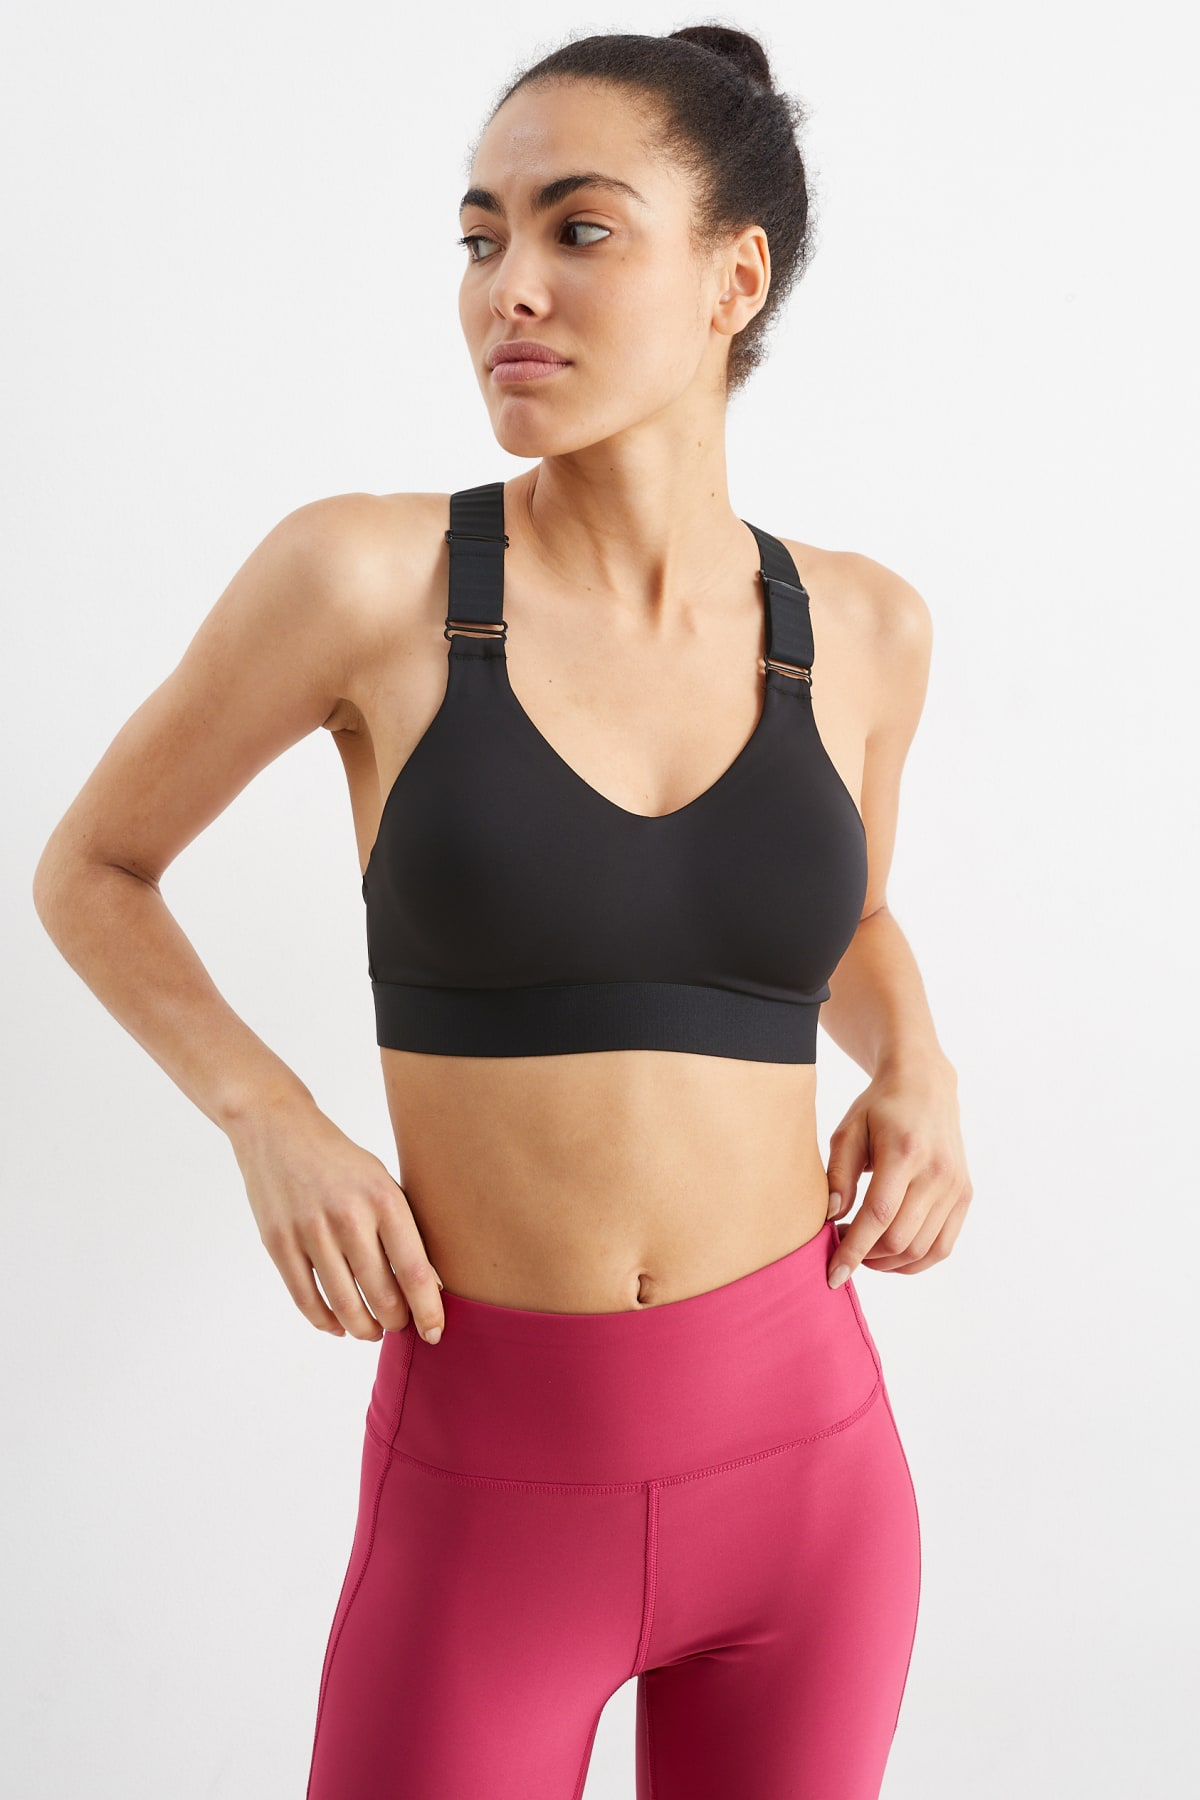 Find your perfect Sports bras here